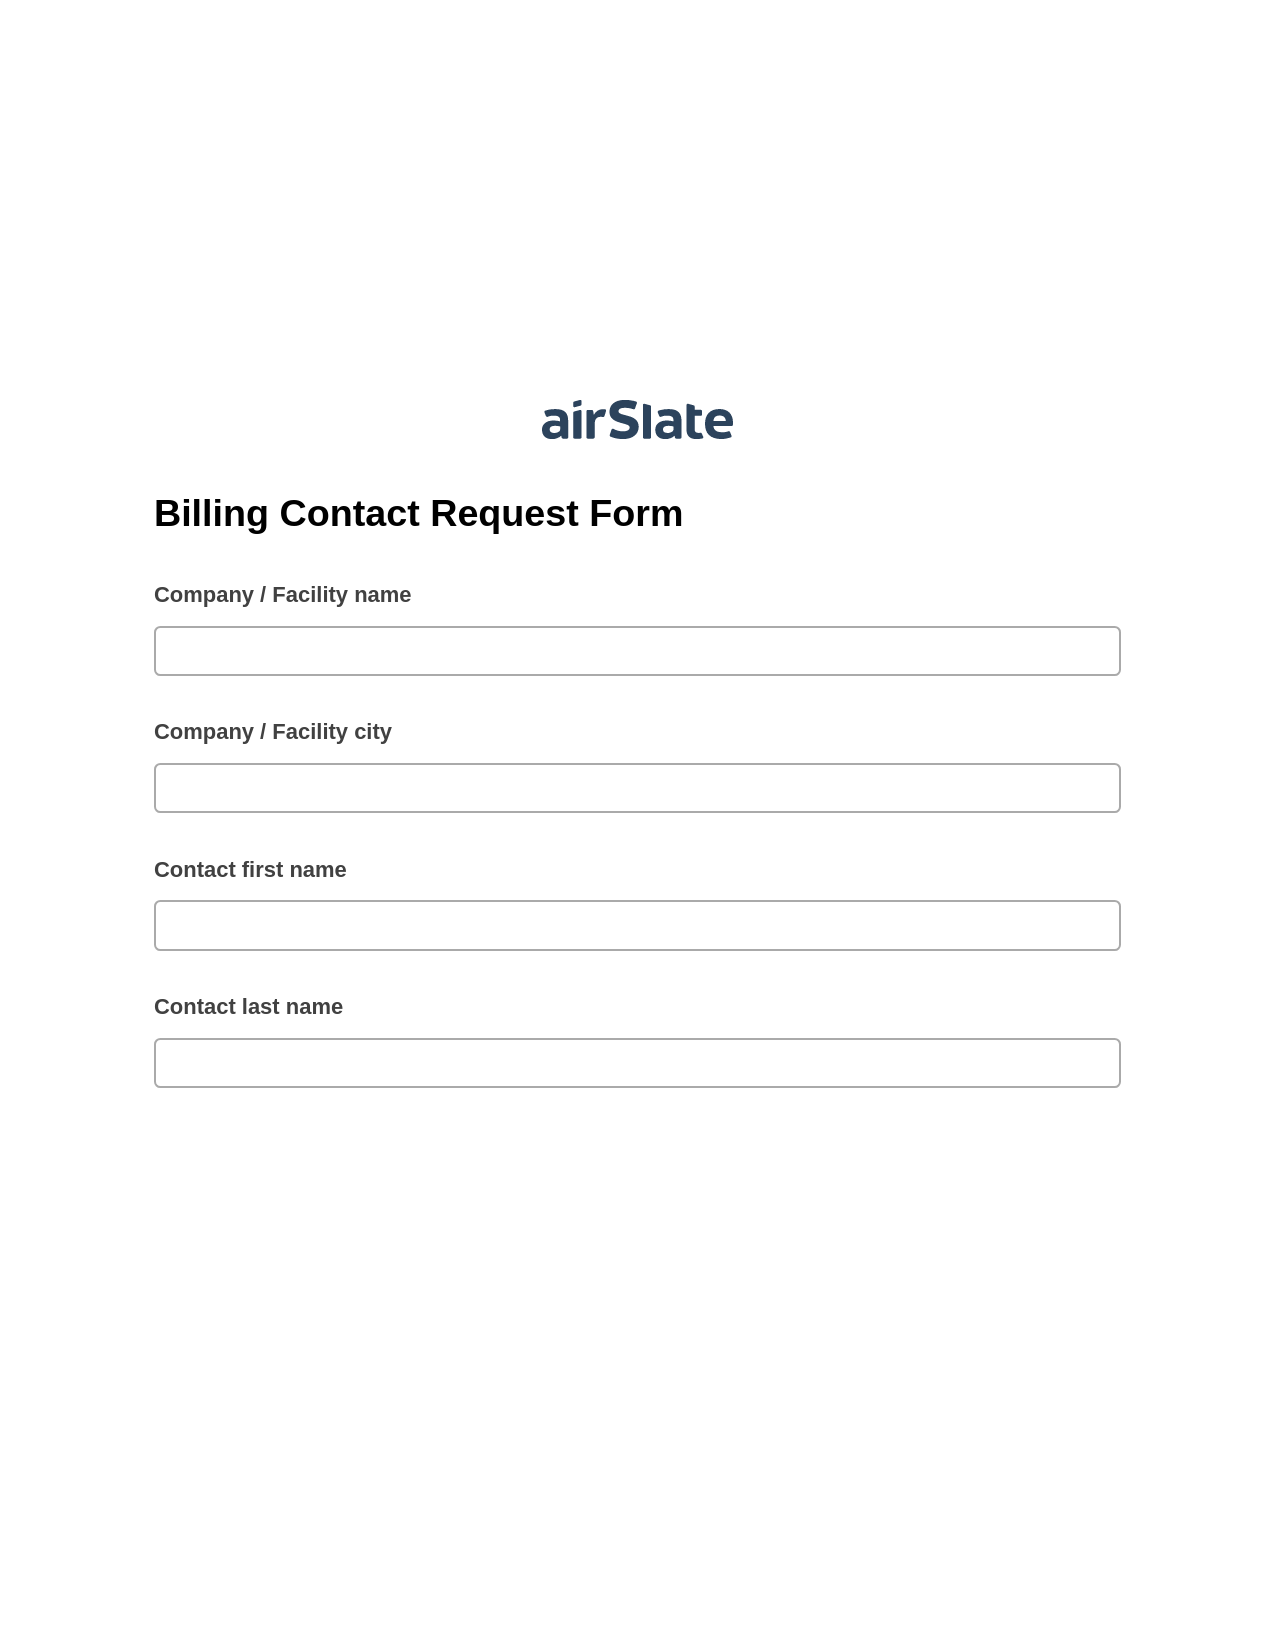 Multirole Billing Contact Request Form Pre-fill from CSV File Bot, Reminder Bot, Export to Excel 365 Bot